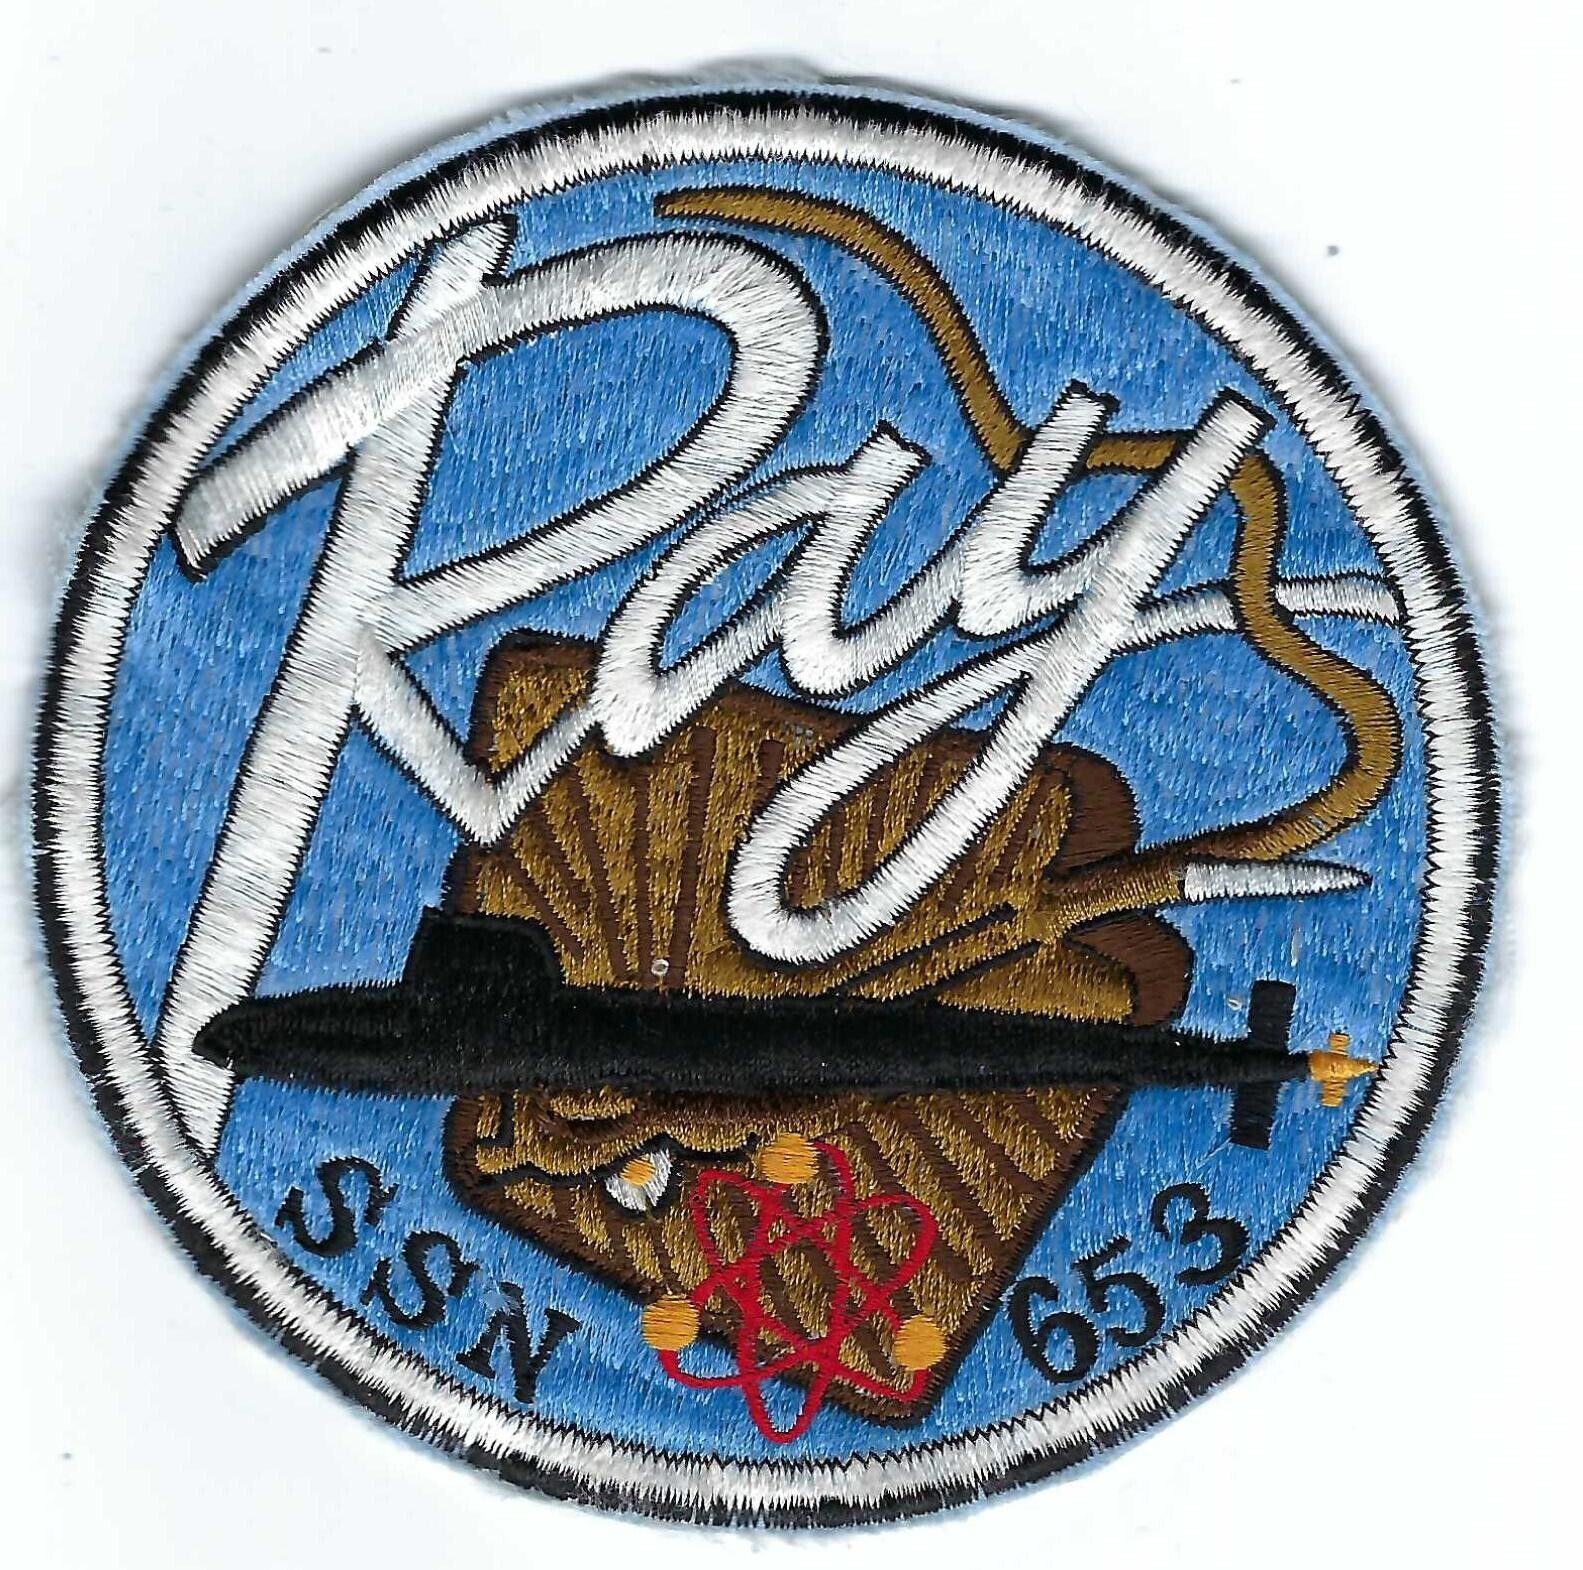 USS Ray SSN 653  - Vintage - fr private collection - 5 inch EonT BCPc7799